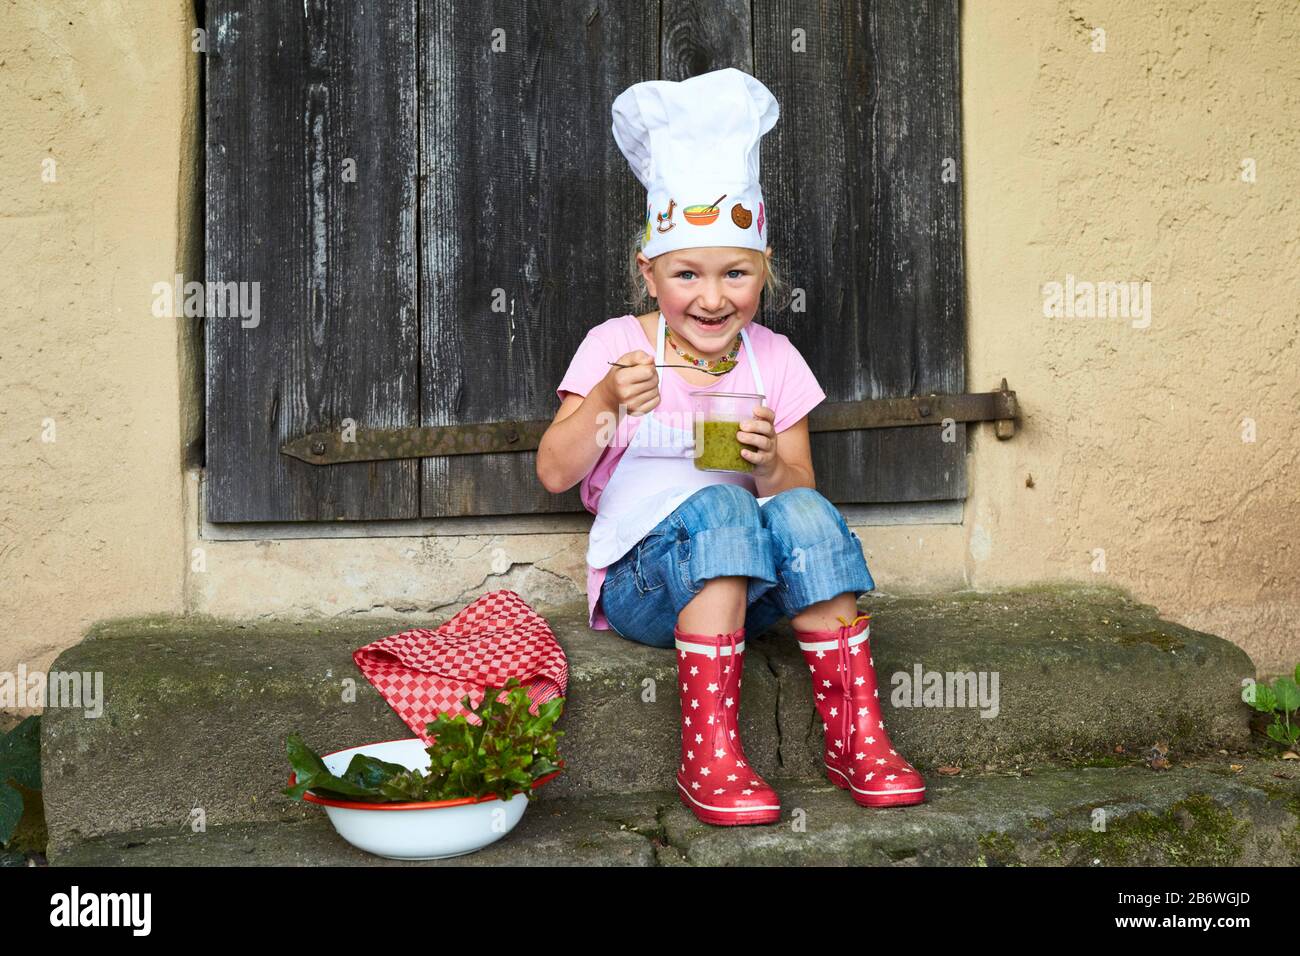 Children investigating food. Series: cooking salad soup, eating self-made soup. Learning according to the Reggio Pedagogy principle, playful understanding and discovery. Germany. Stock Photo